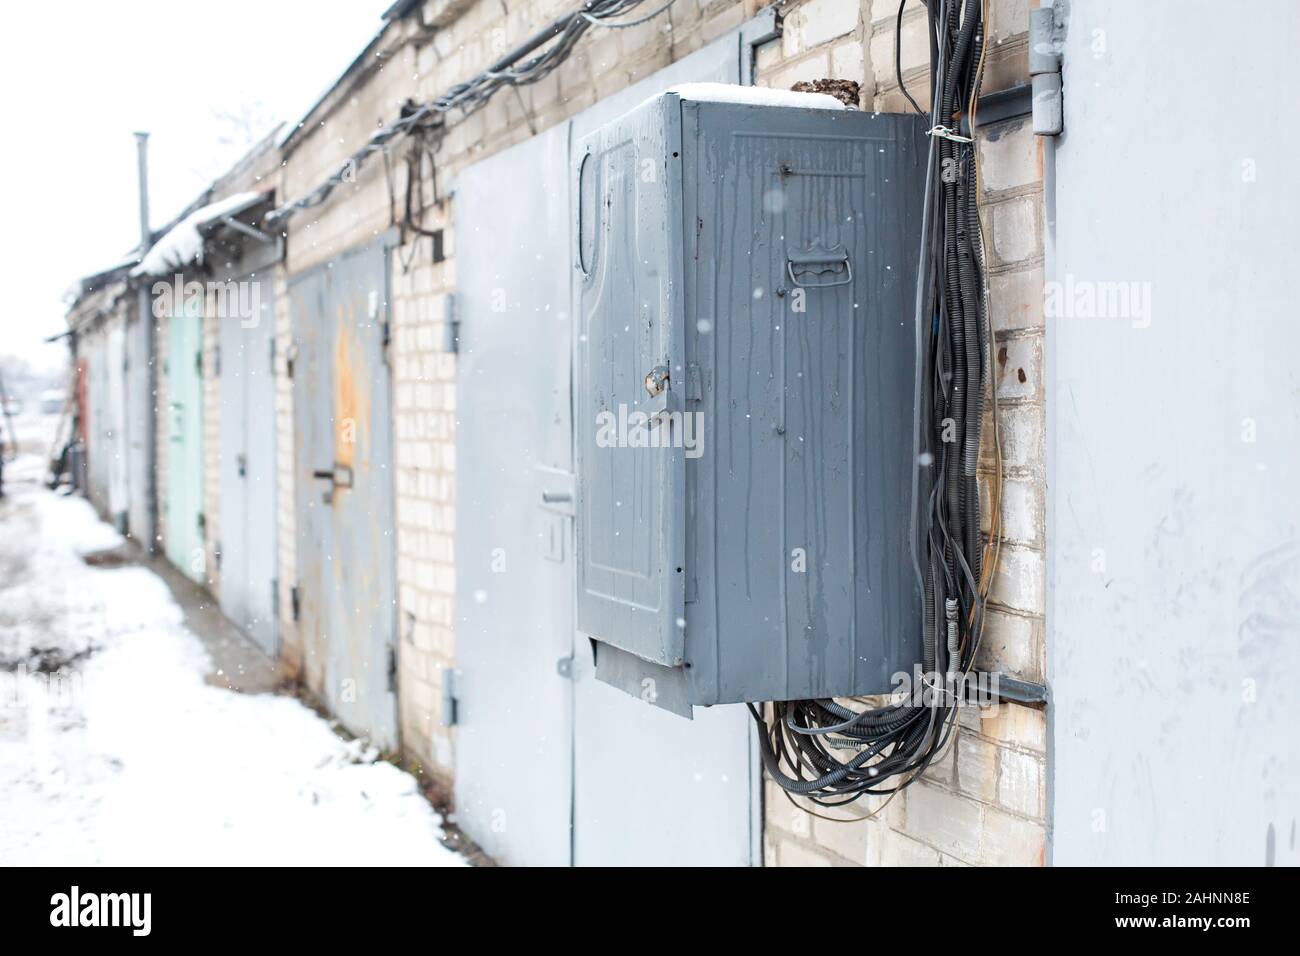 Old electrical communications box hanging on a wall in a garage cooperative. Stock Photo